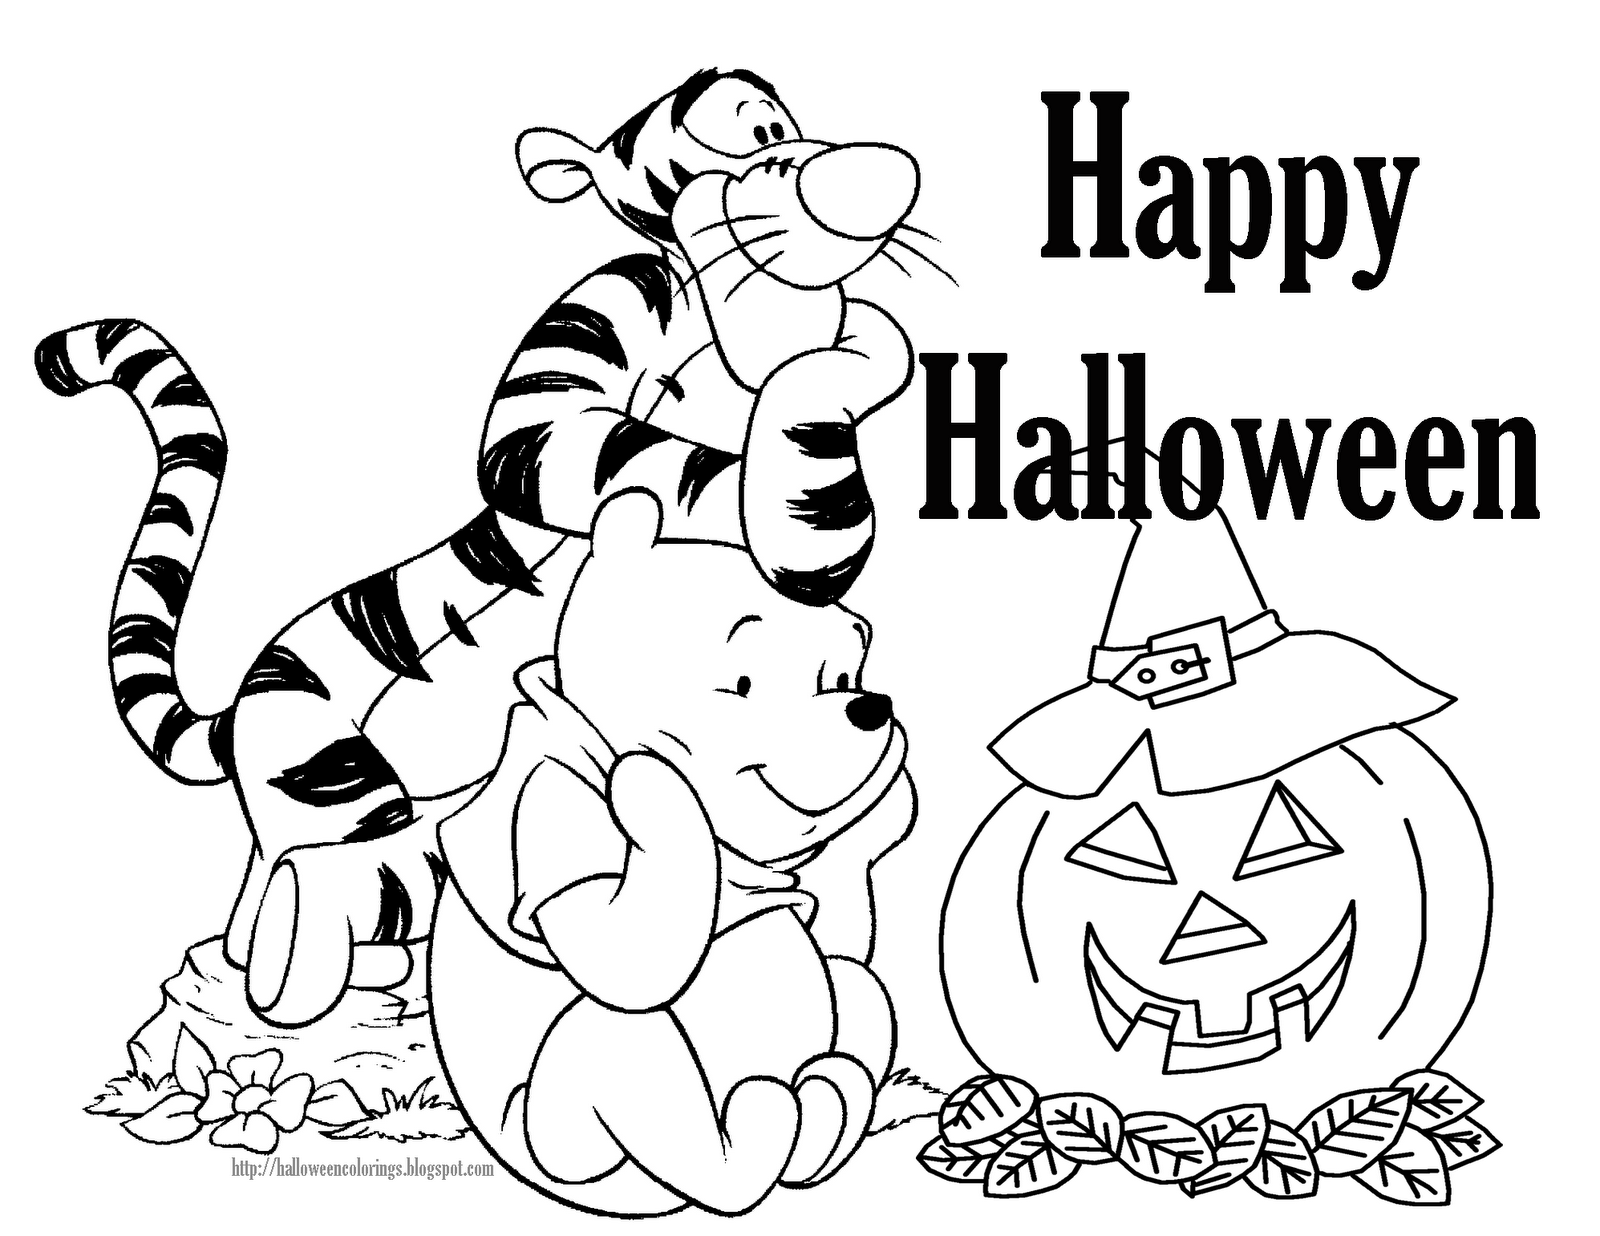 halloween coloring pages to color online halloween printable coloring pages minnesota miranda coloring color to pages halloween online 